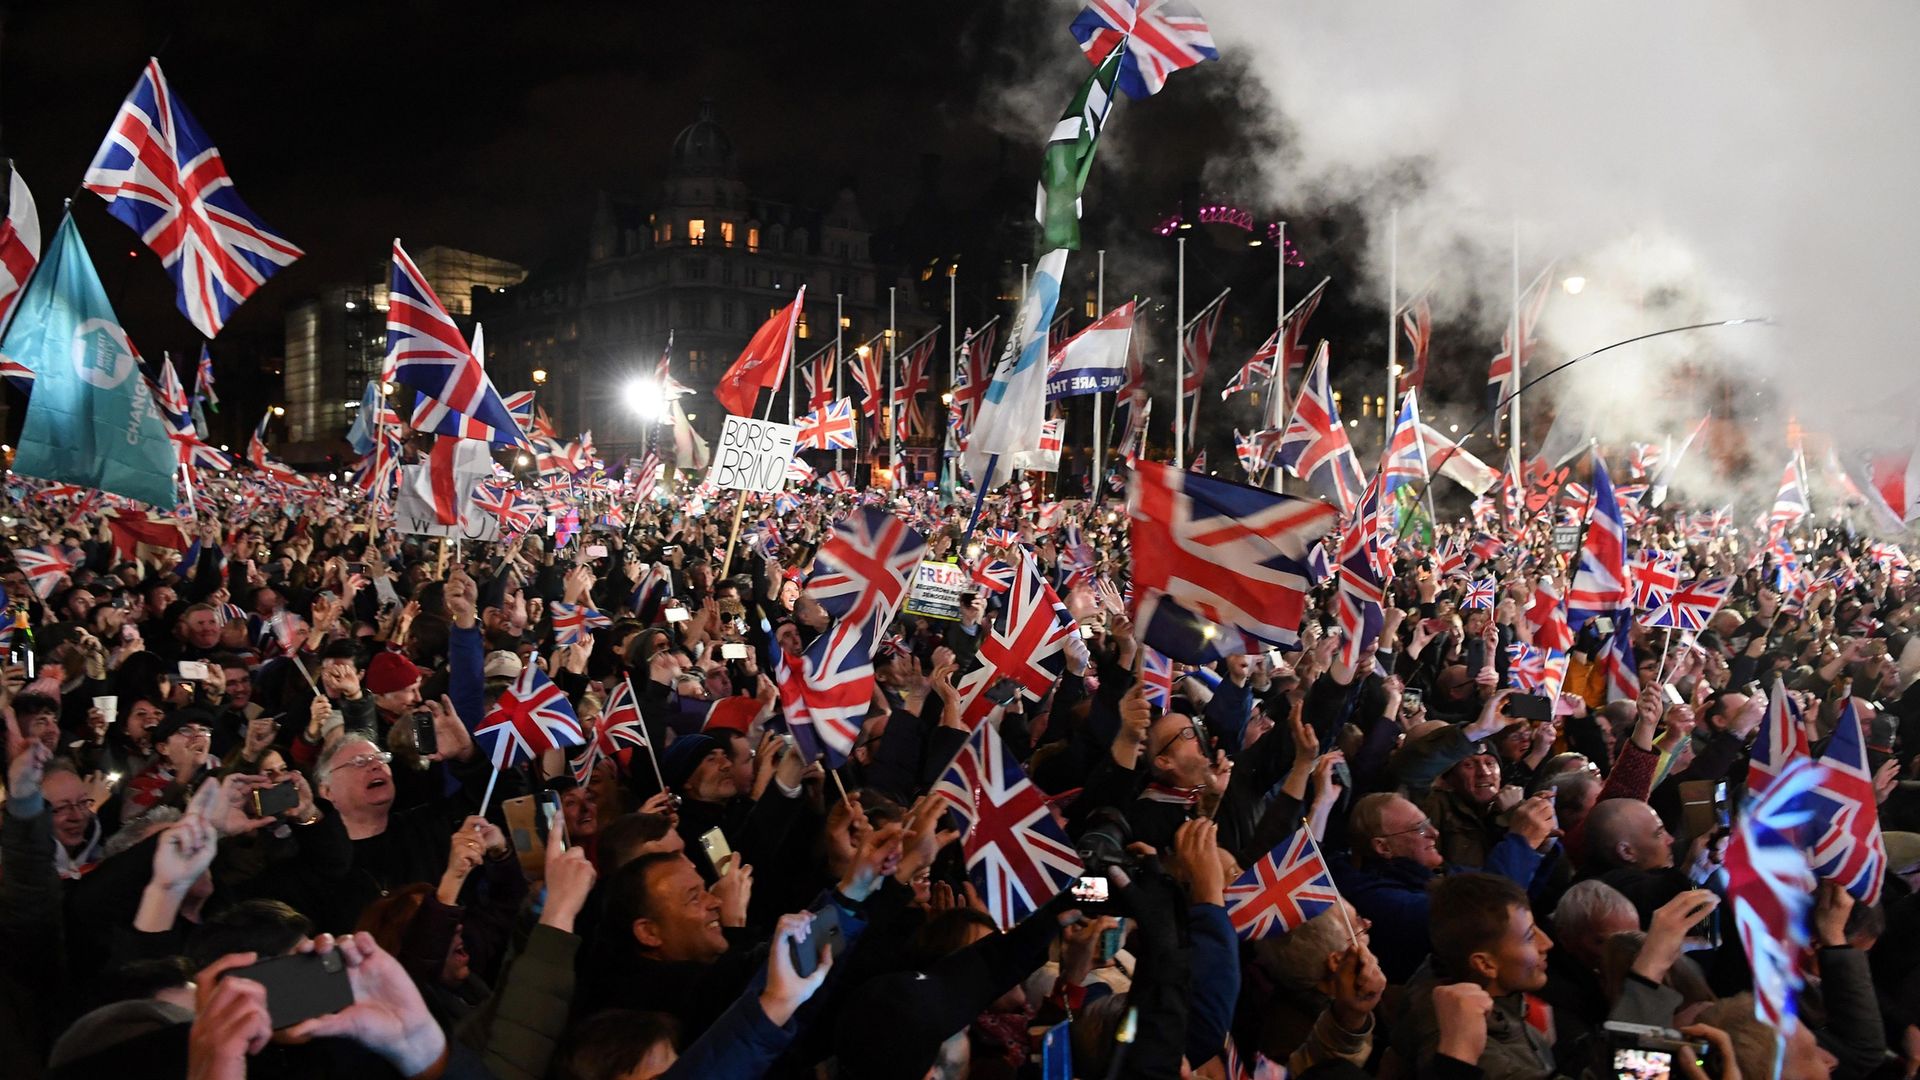 Brexit supporters wave Union flags at a rally in Parliament Square, marking the moment Britain formally left the EU on January 31, 2020 - Credit: AFP via Getty Images